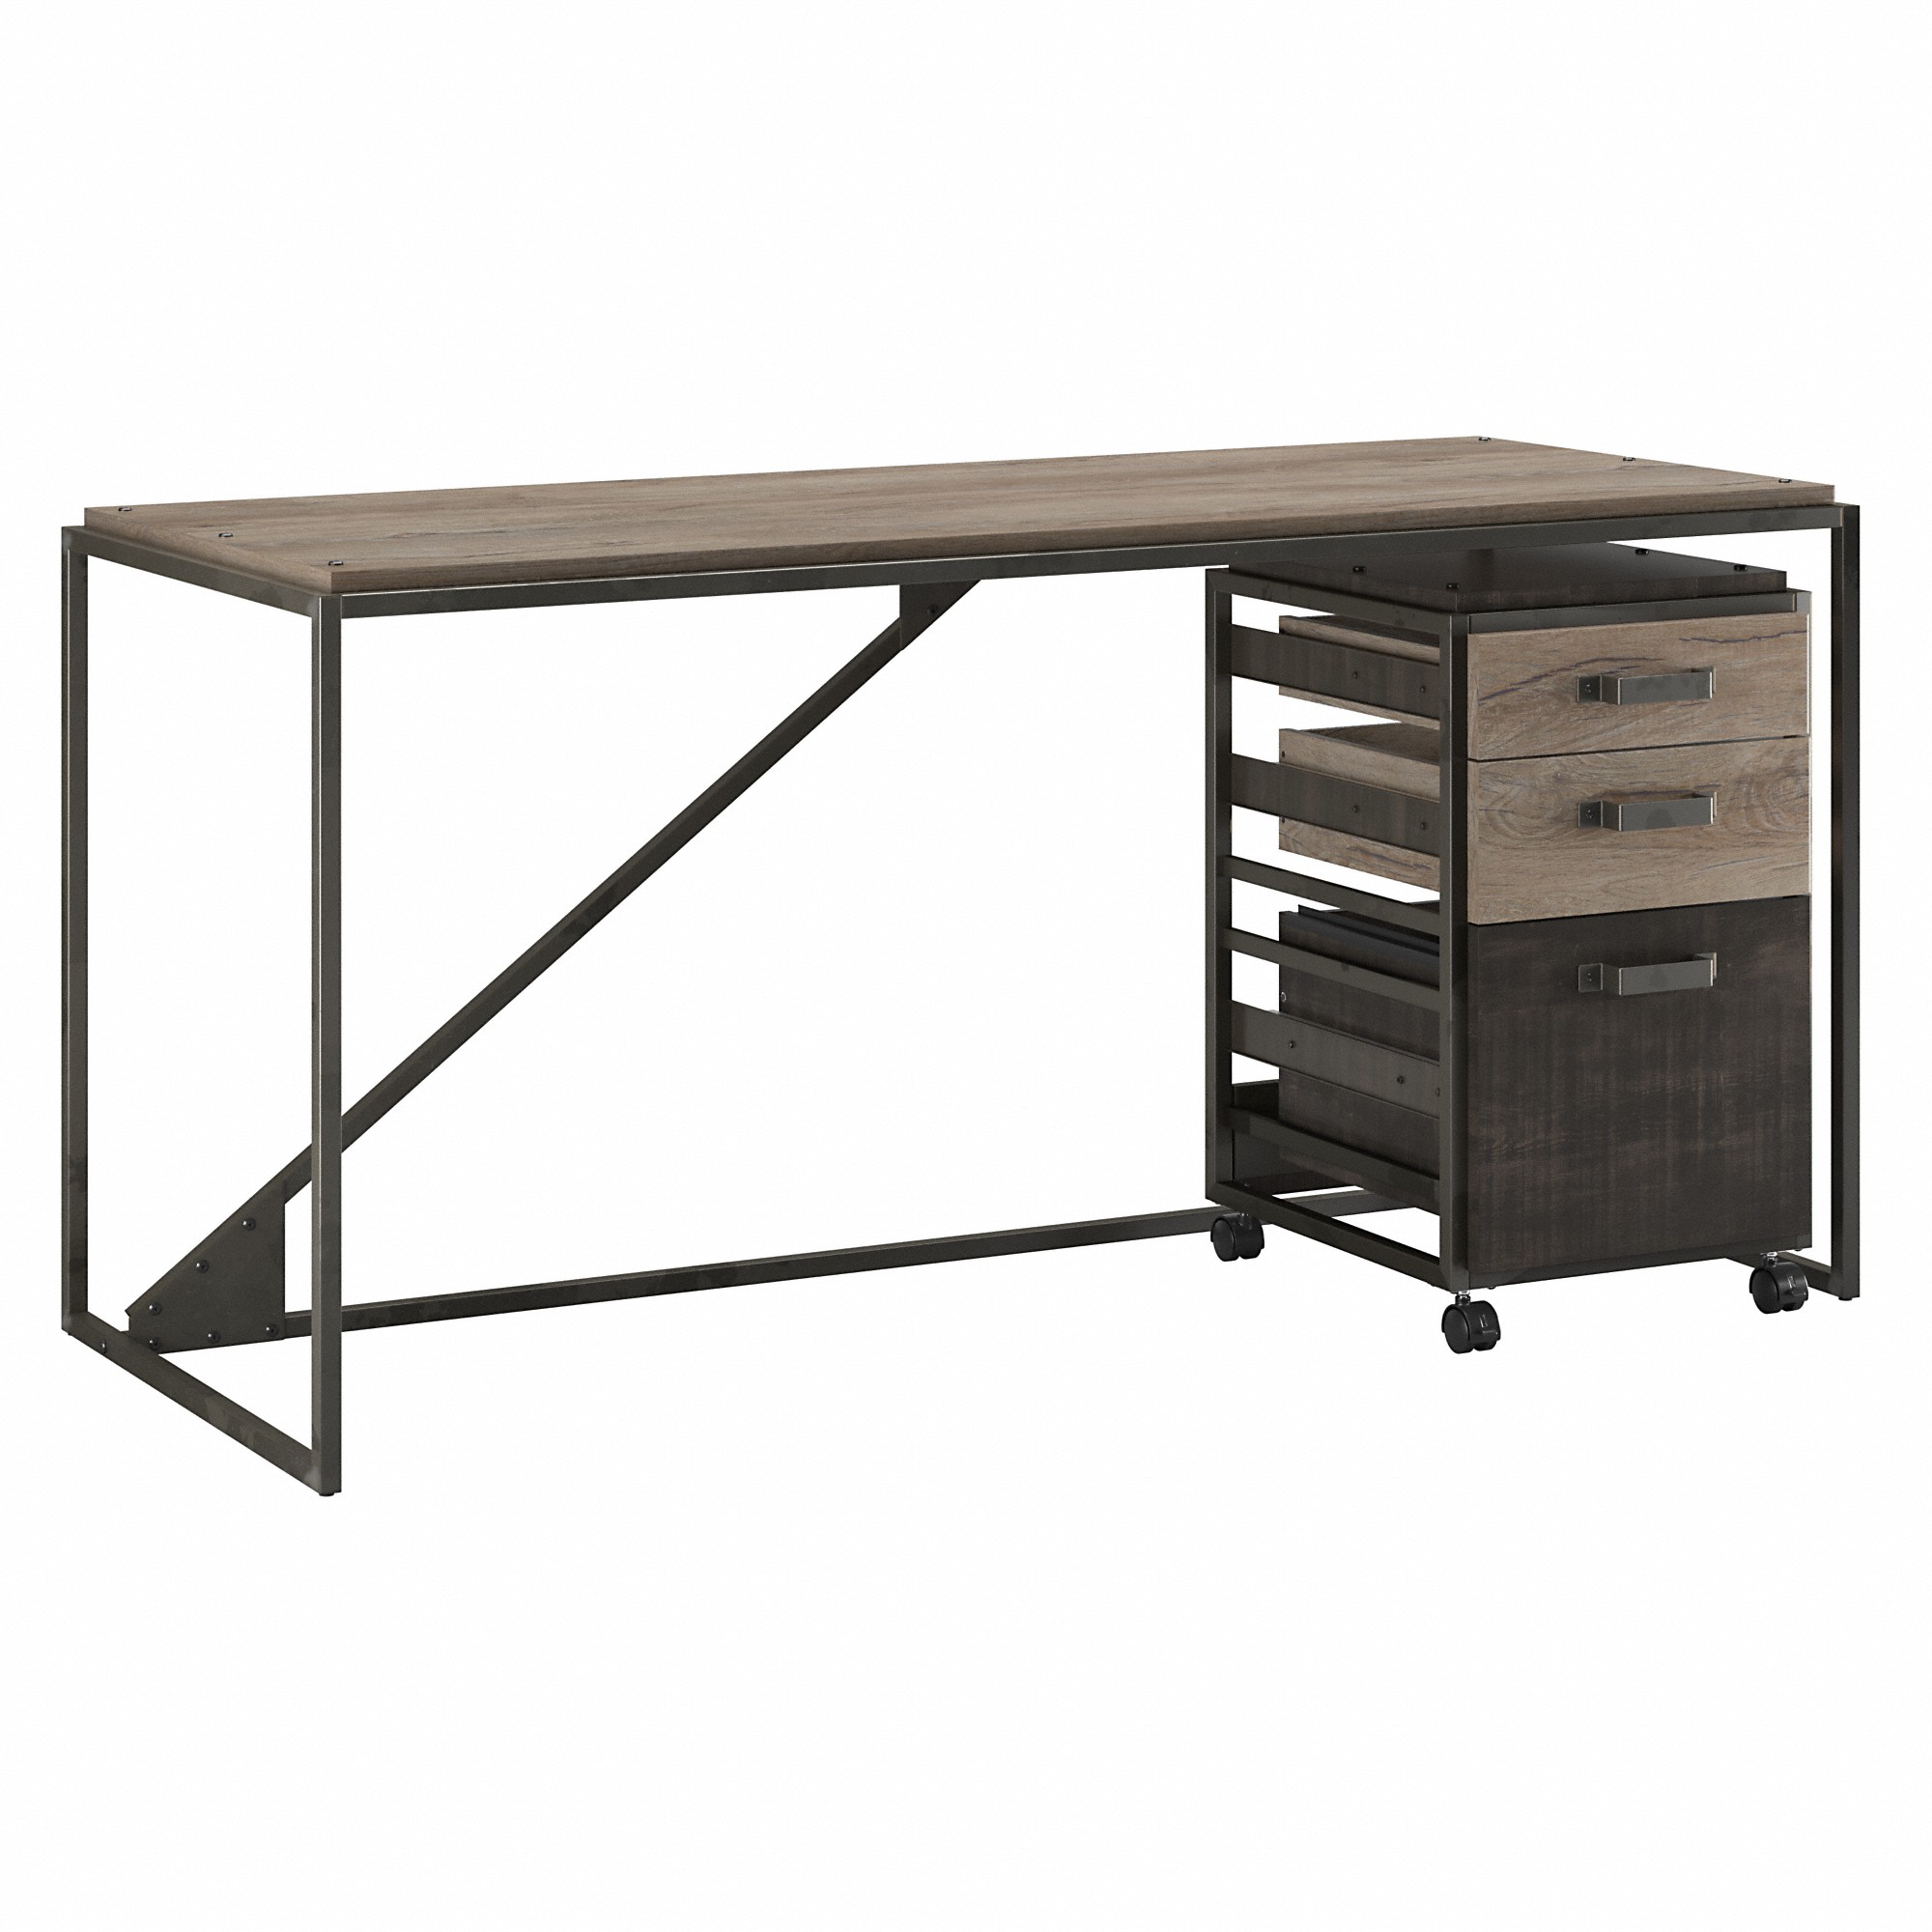 Bush Furniture Refinery 62" Industrial Writing Desk with Mobile File Cabinet - image 2 of 7